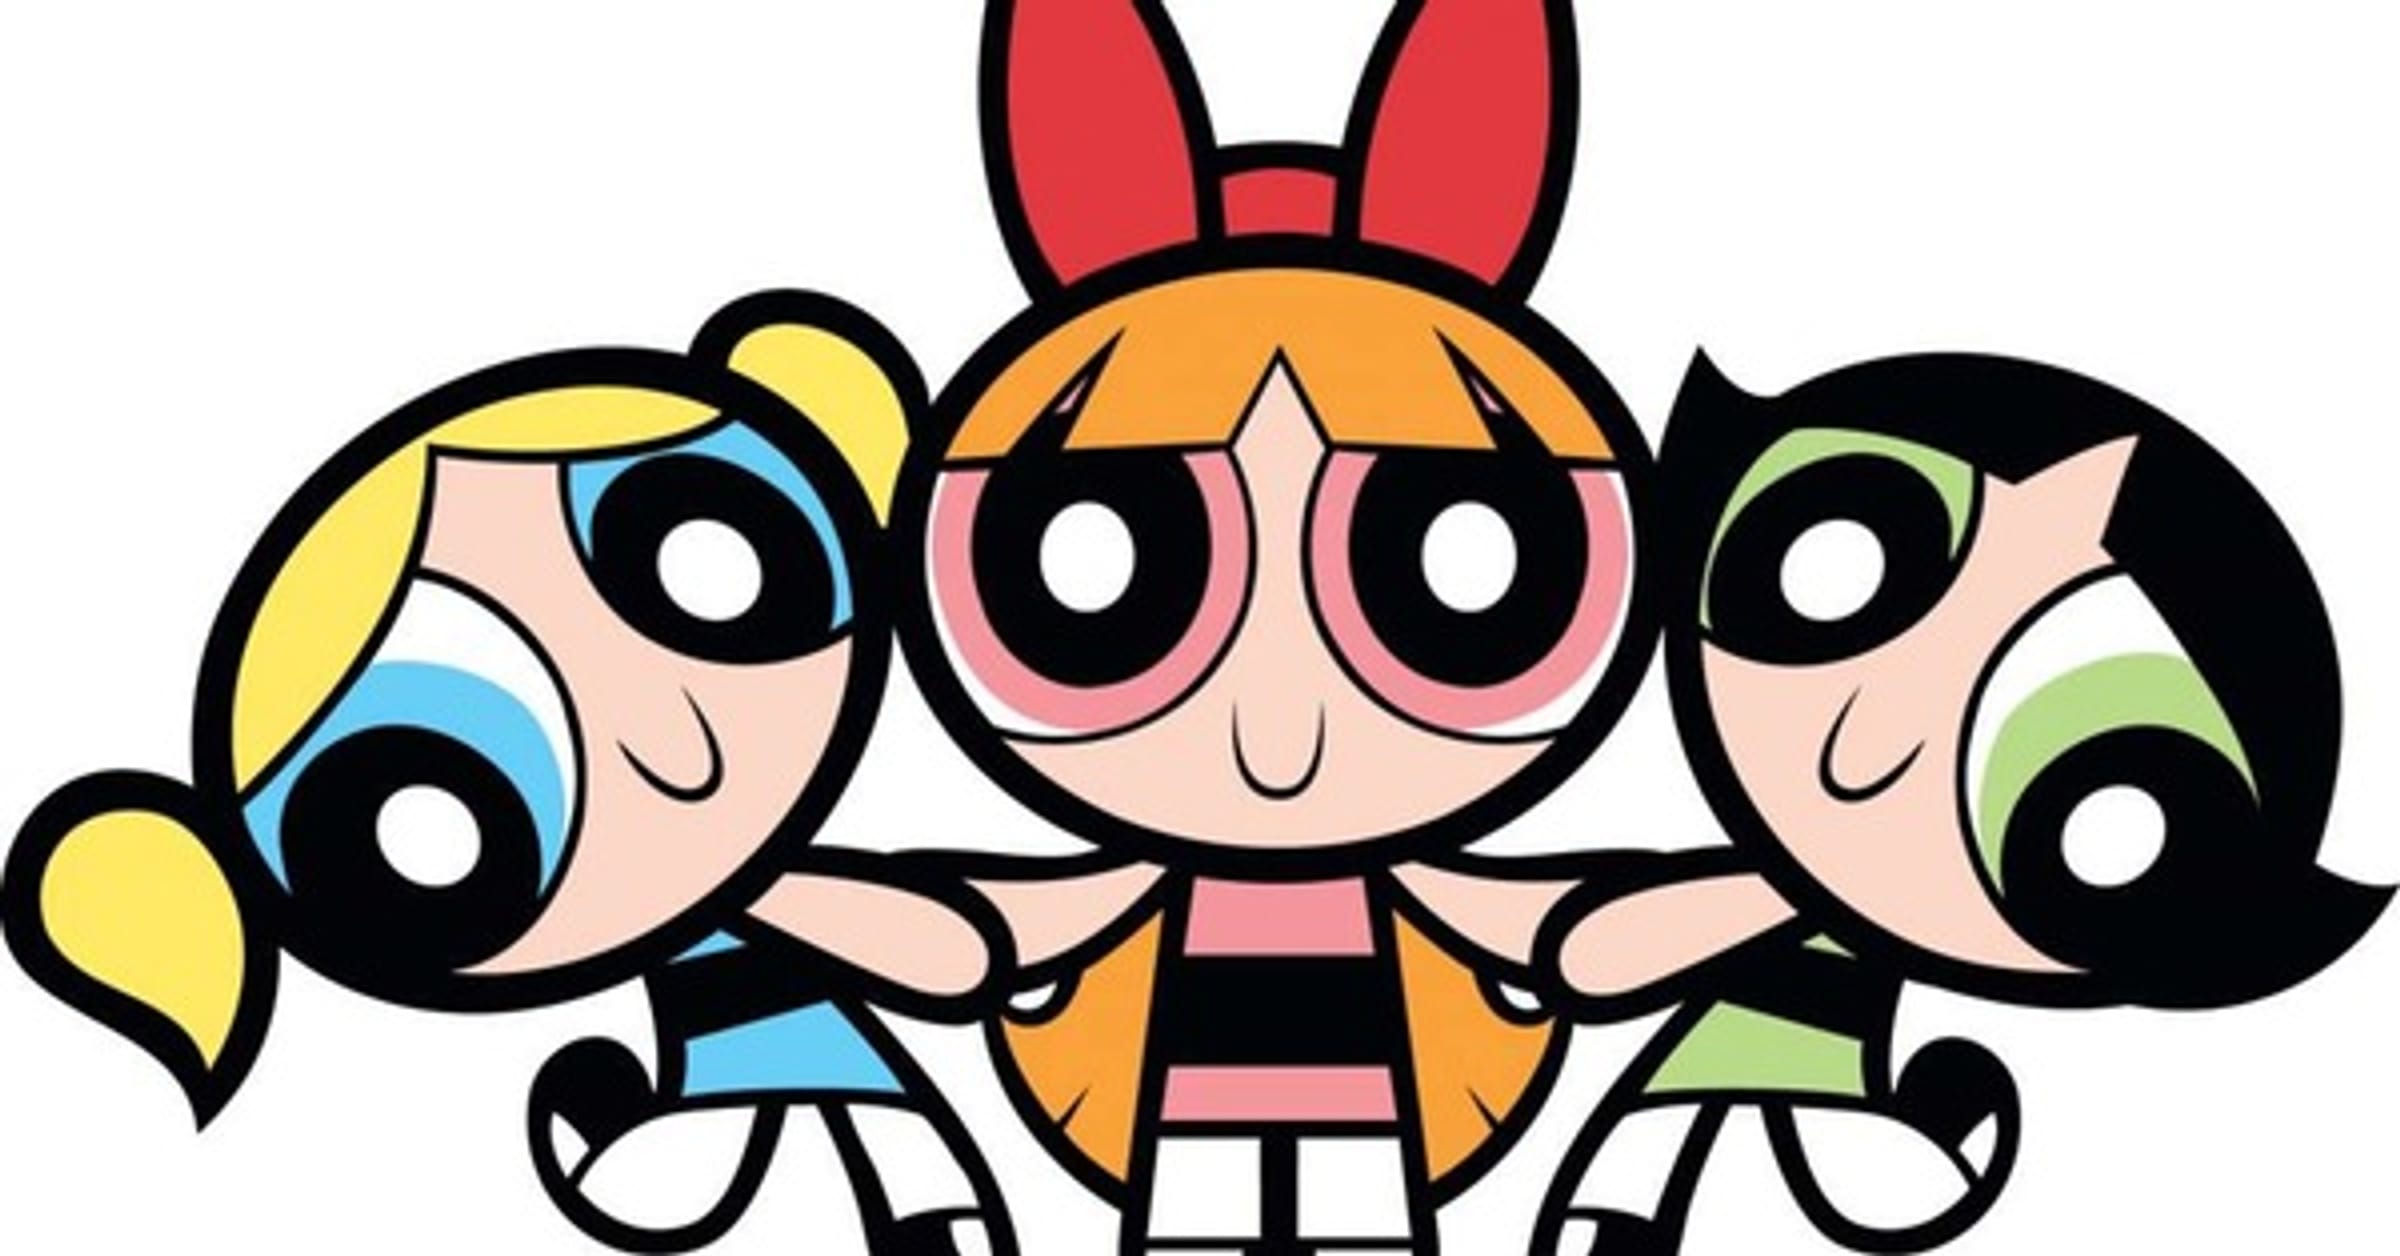 The Major 'The Powerpuff Girls' Characters (with Names), Ranked